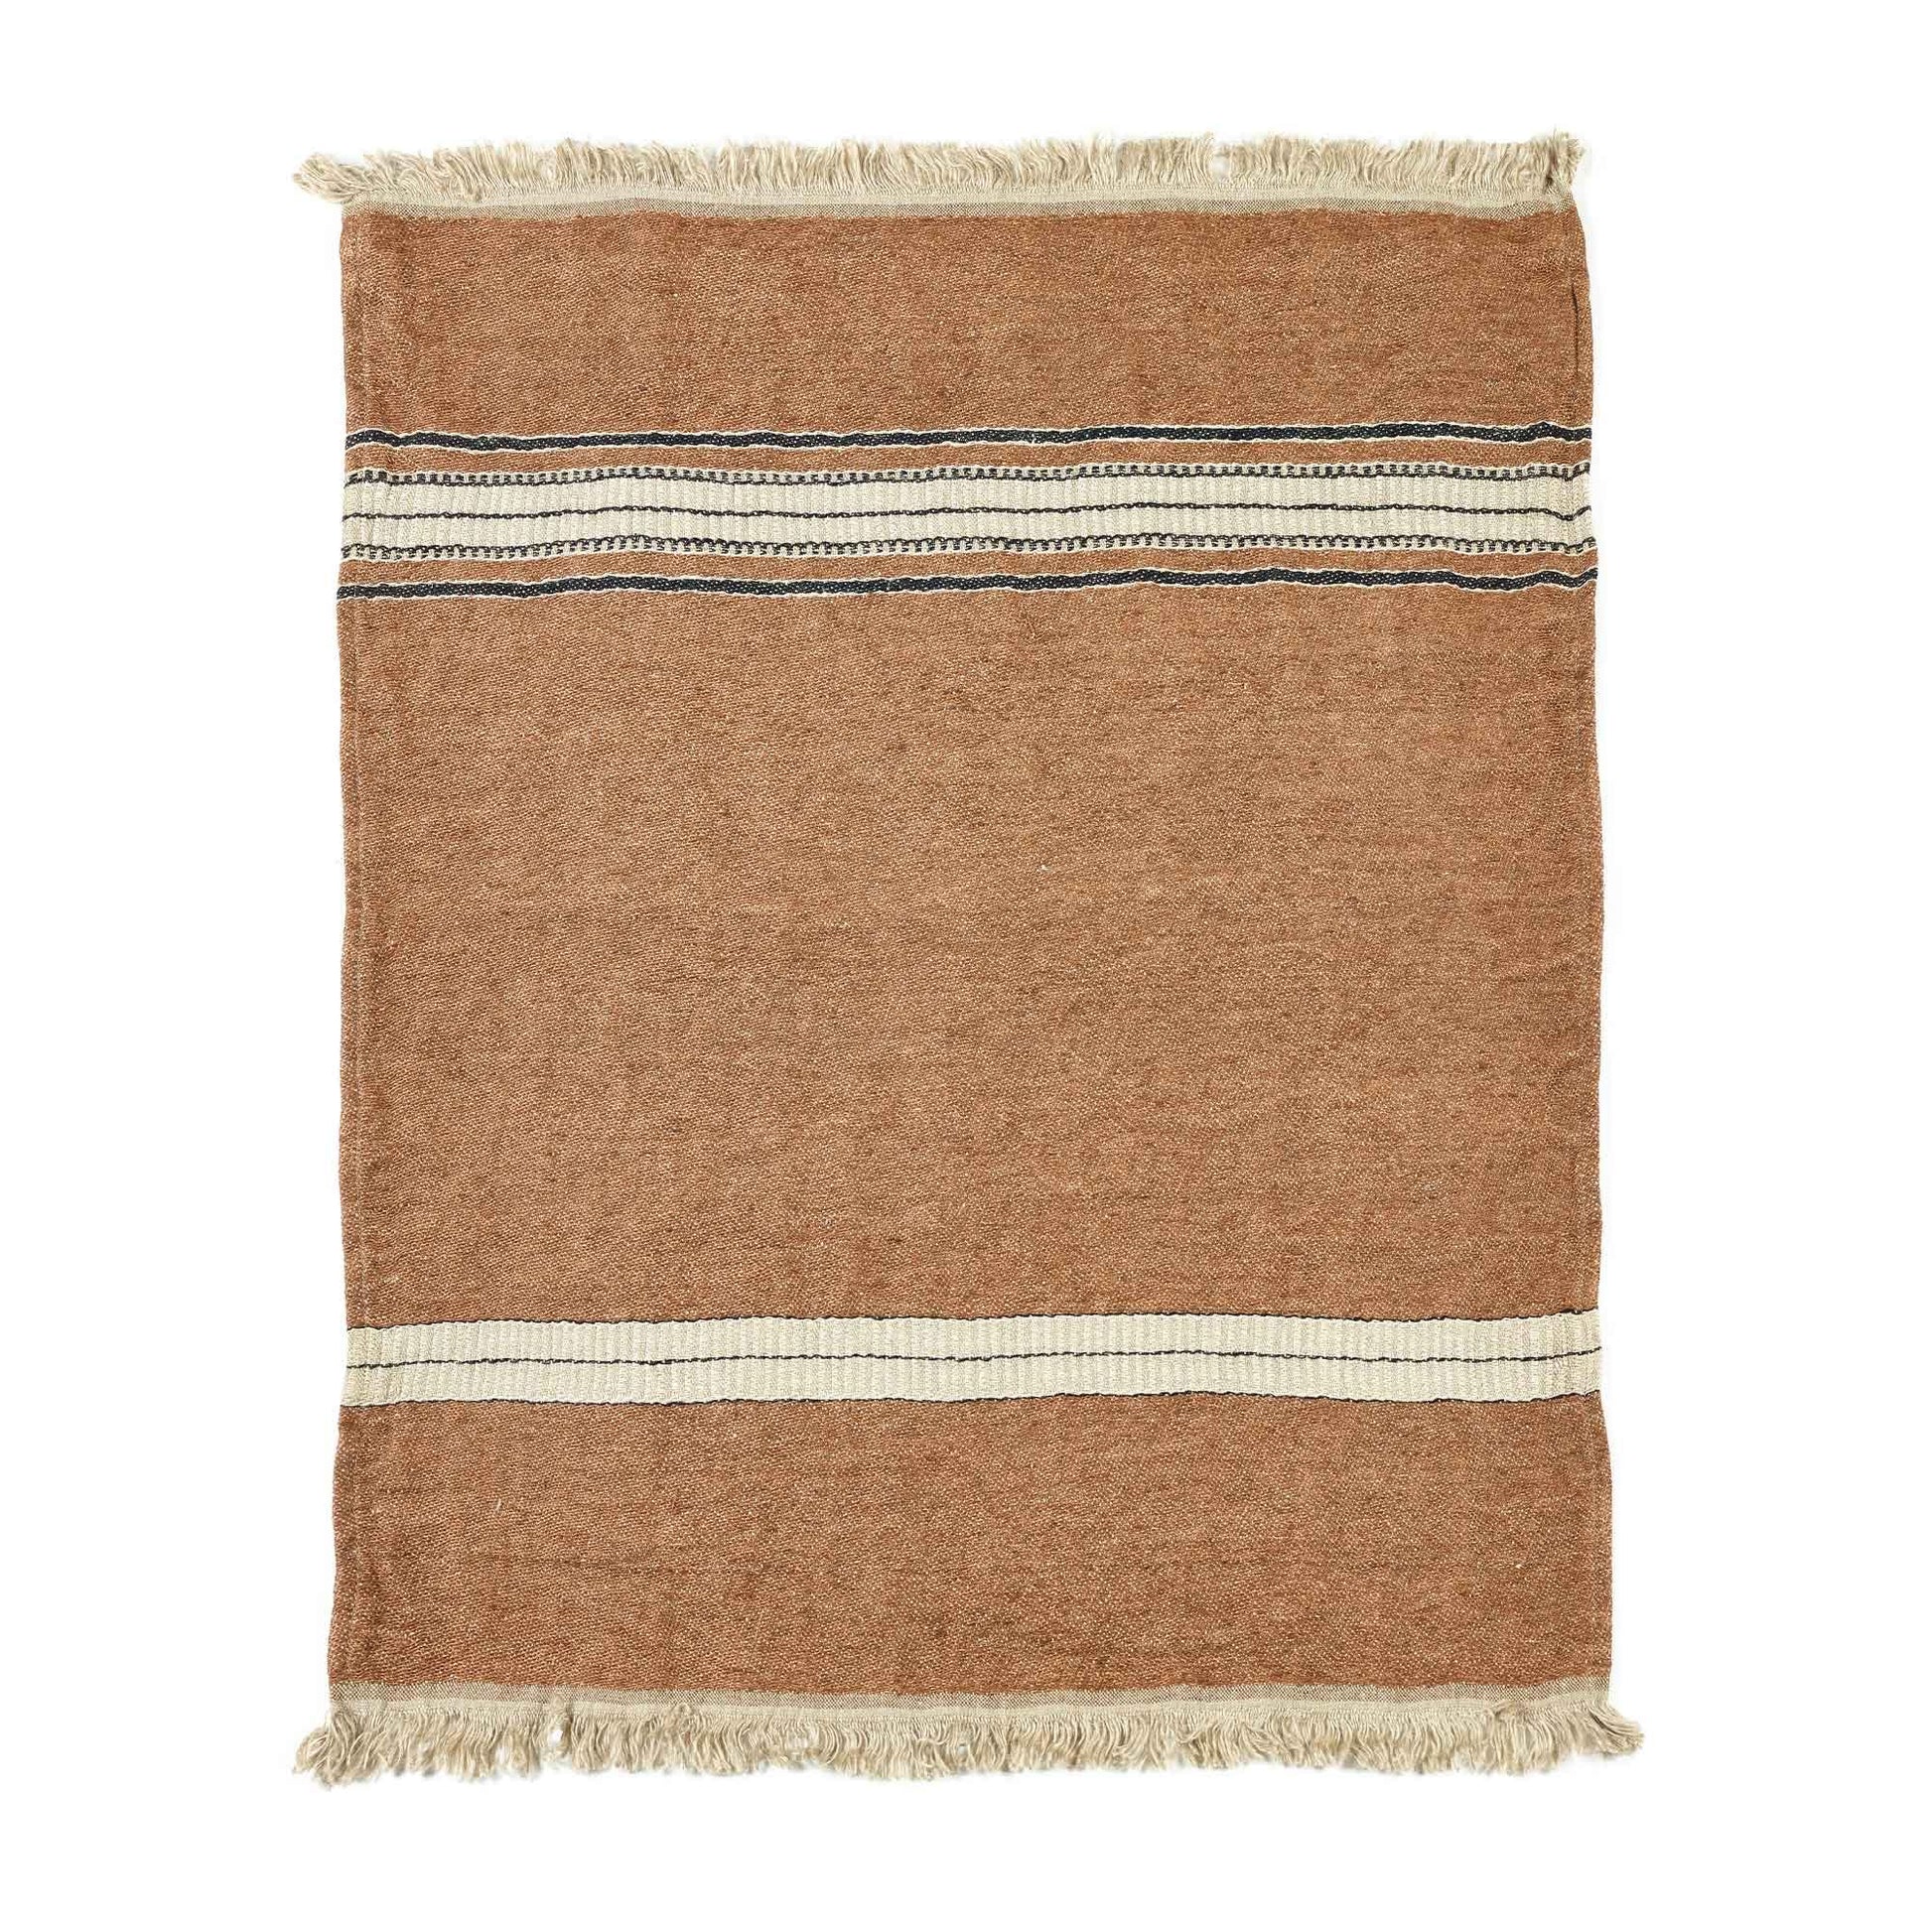 Belgian linen fouta throw blanket flat lay product shot in color Bruges by Libeco for South Hous.